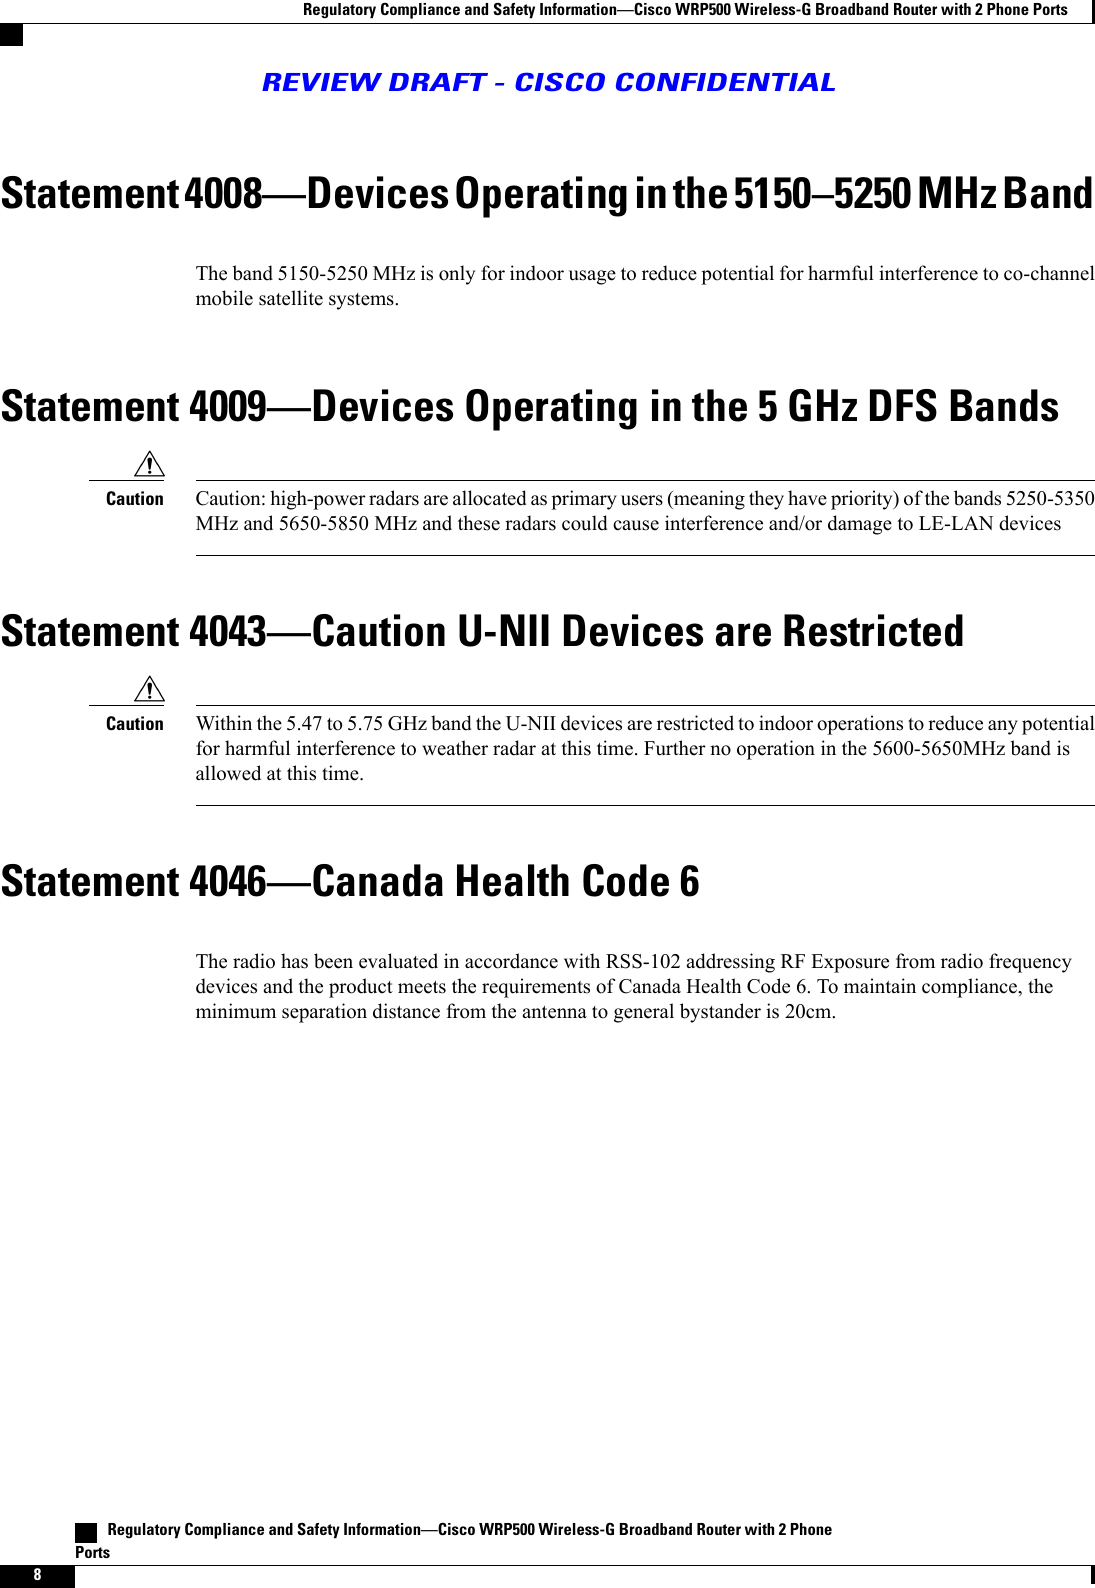 Statement 4008Devices Operating in the 51505250 MHz BandThe band 5150-5250 MHz is only for indoor usage to reduce potential for harmful interference to co-channelmobile satellite systems.Statement 4009Devices Operating in the 5 GHz DFS BandsCaution: high-power radars are allocated as primary users (meaning they have priority) of the bands 5250-5350MHz and 5650-5850 MHz and these radars could cause interference and/or damage to LE-LAN devicesCautionStatement 4043Caution U-NII Devices are RestrictedWithin the 5.47 to 5.75 GHz band the U-NII devices are restricted to indoor operations to reduce any potentialfor harmful interference to weather radar at this time. Further no operation in the 5600-5650MHz band isallowed at this time.CautionStatement 4046Canada Health Code 6The radio has been evaluated in accordance with RSS-102 addressing RF Exposure from radio frequencydevices and the product meets the requirements of Canada Health Code 6. To maintain compliance, theminimum separation distance from the antenna to general bystander is 20cm.   Regulatory Compliance and Safety InformationCisco WRP500 Wireless-G Broadband Router with 2 PhonePorts8Regulatory Compliance and Safety InformationCisco WRP500 Wireless-G Broadband Router with 2 Phone PortsREVIEW DRAFT - CISCO CONFIDENTIAL